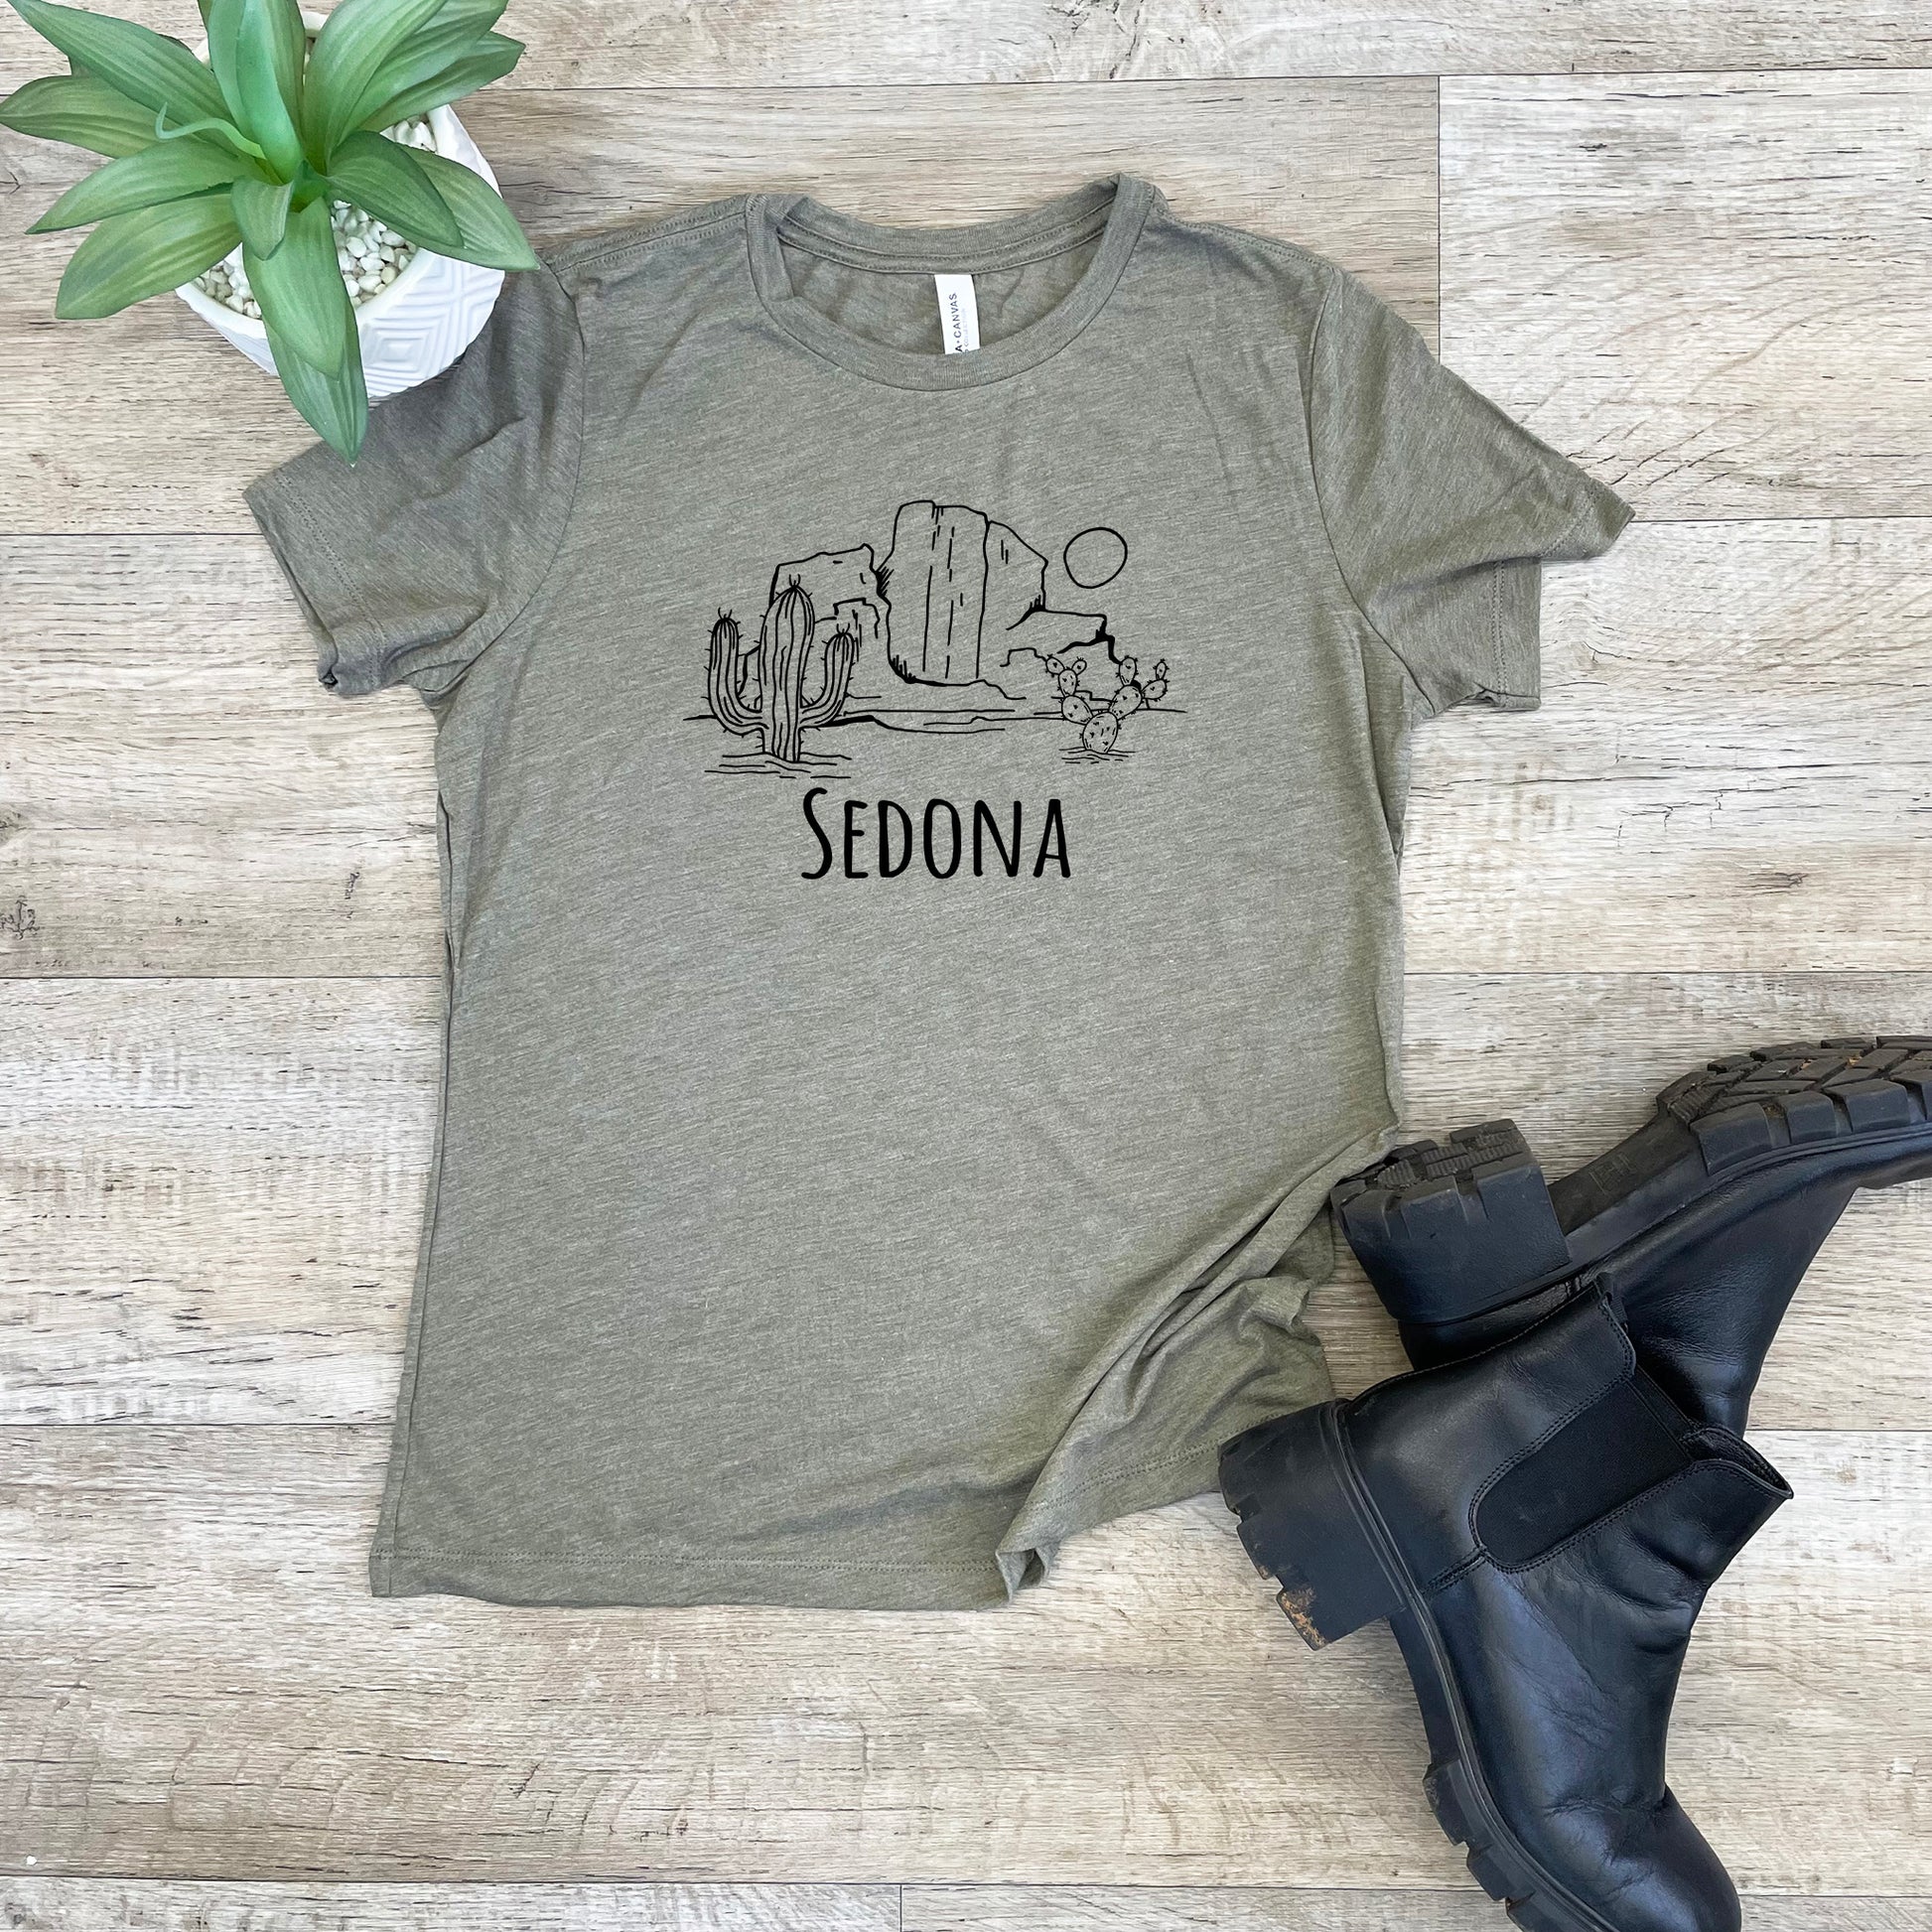 a t - shirt that says sedona on it next to a pair of